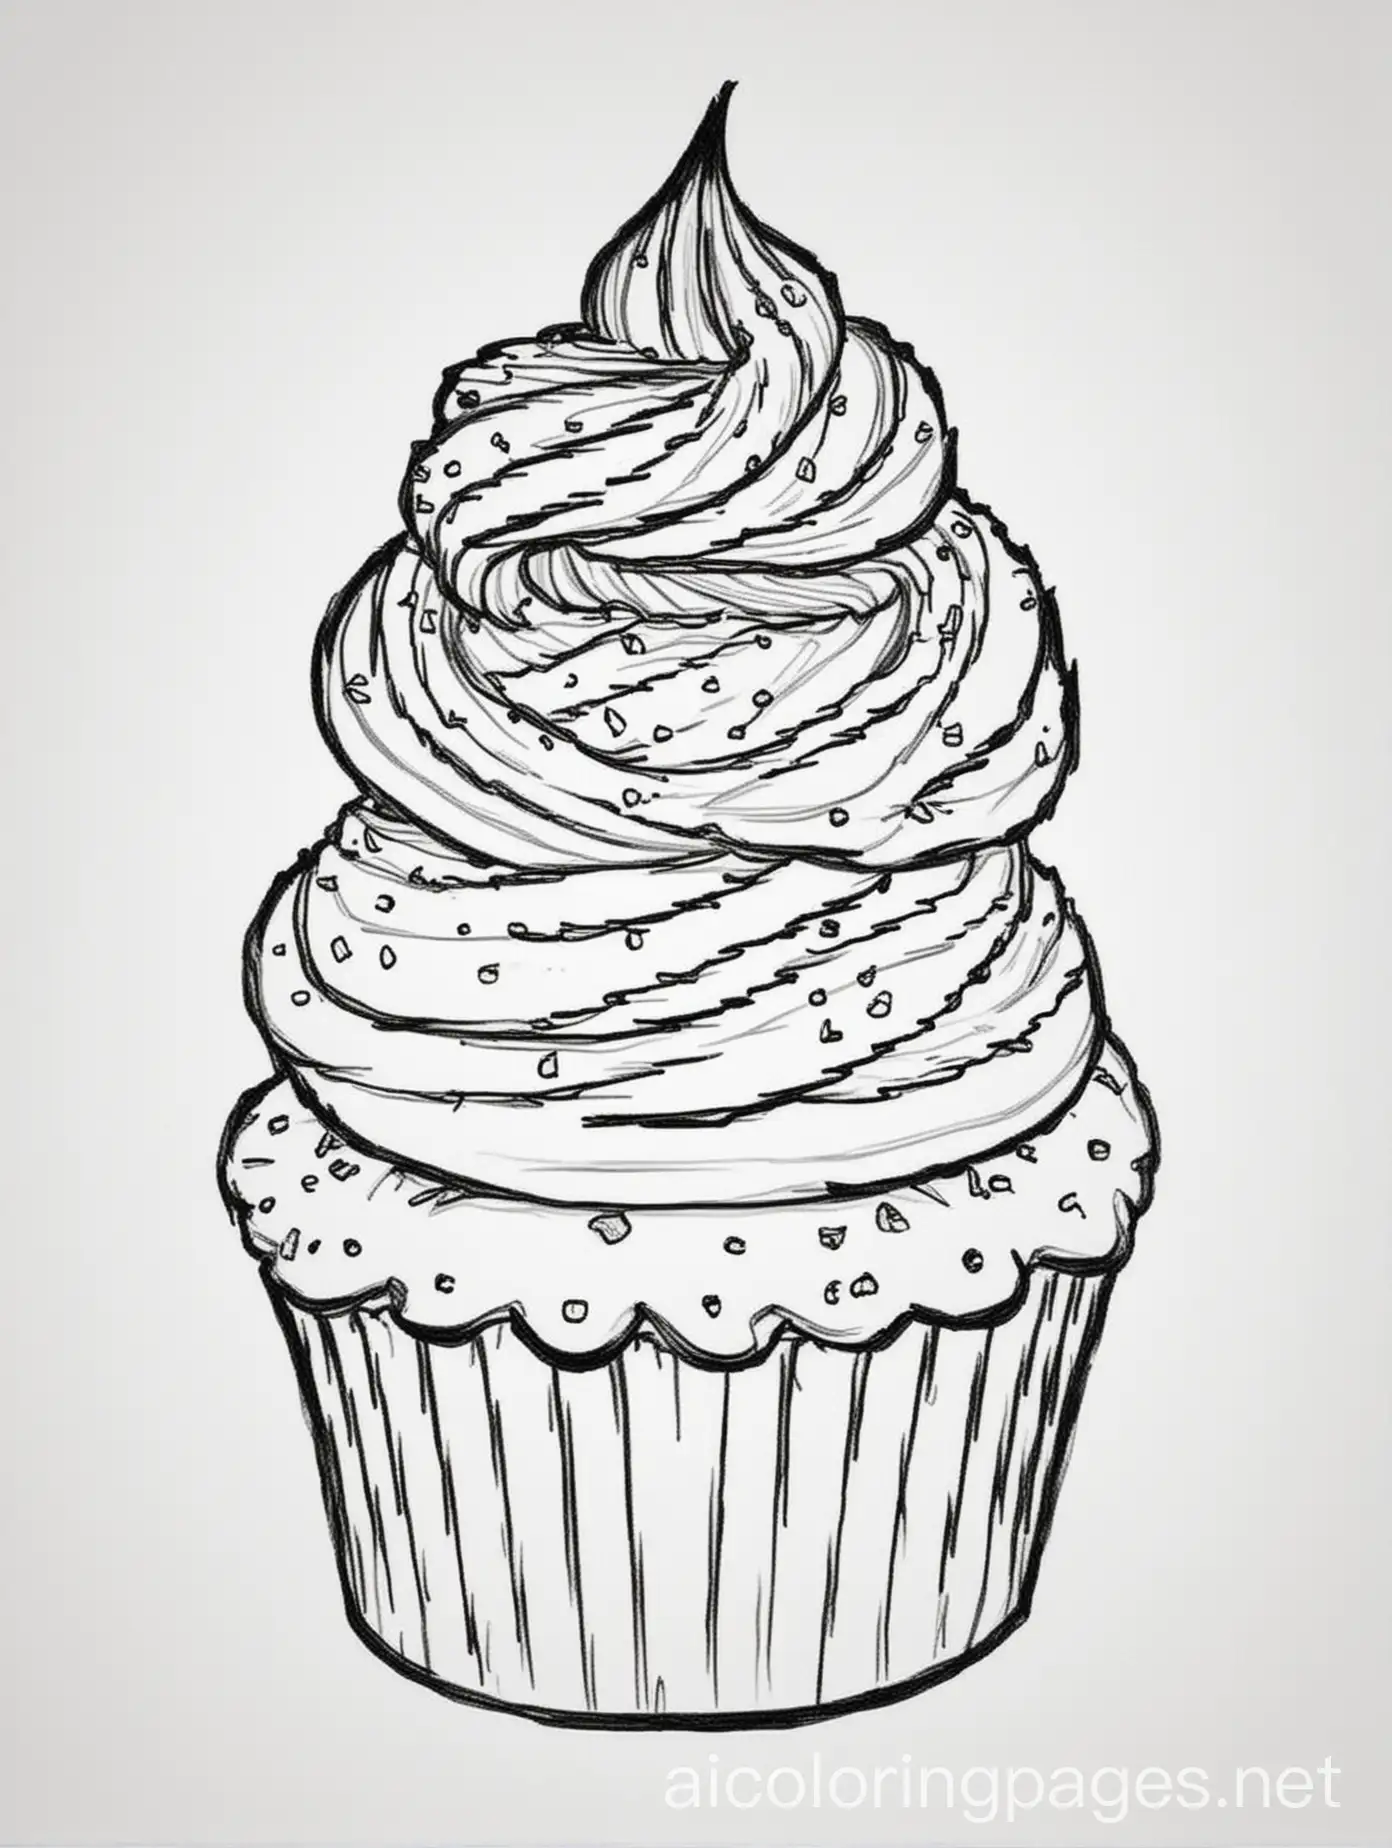 Cupcakes
, Coloring Page, black and white, line art, white background, Simplicity, Ample White Space. The background of the coloring page is plain white to make it easy for young children to color within the lines. The outlines of all the subjects are easy to distinguish, making it simple for kids to color without too much difficulty